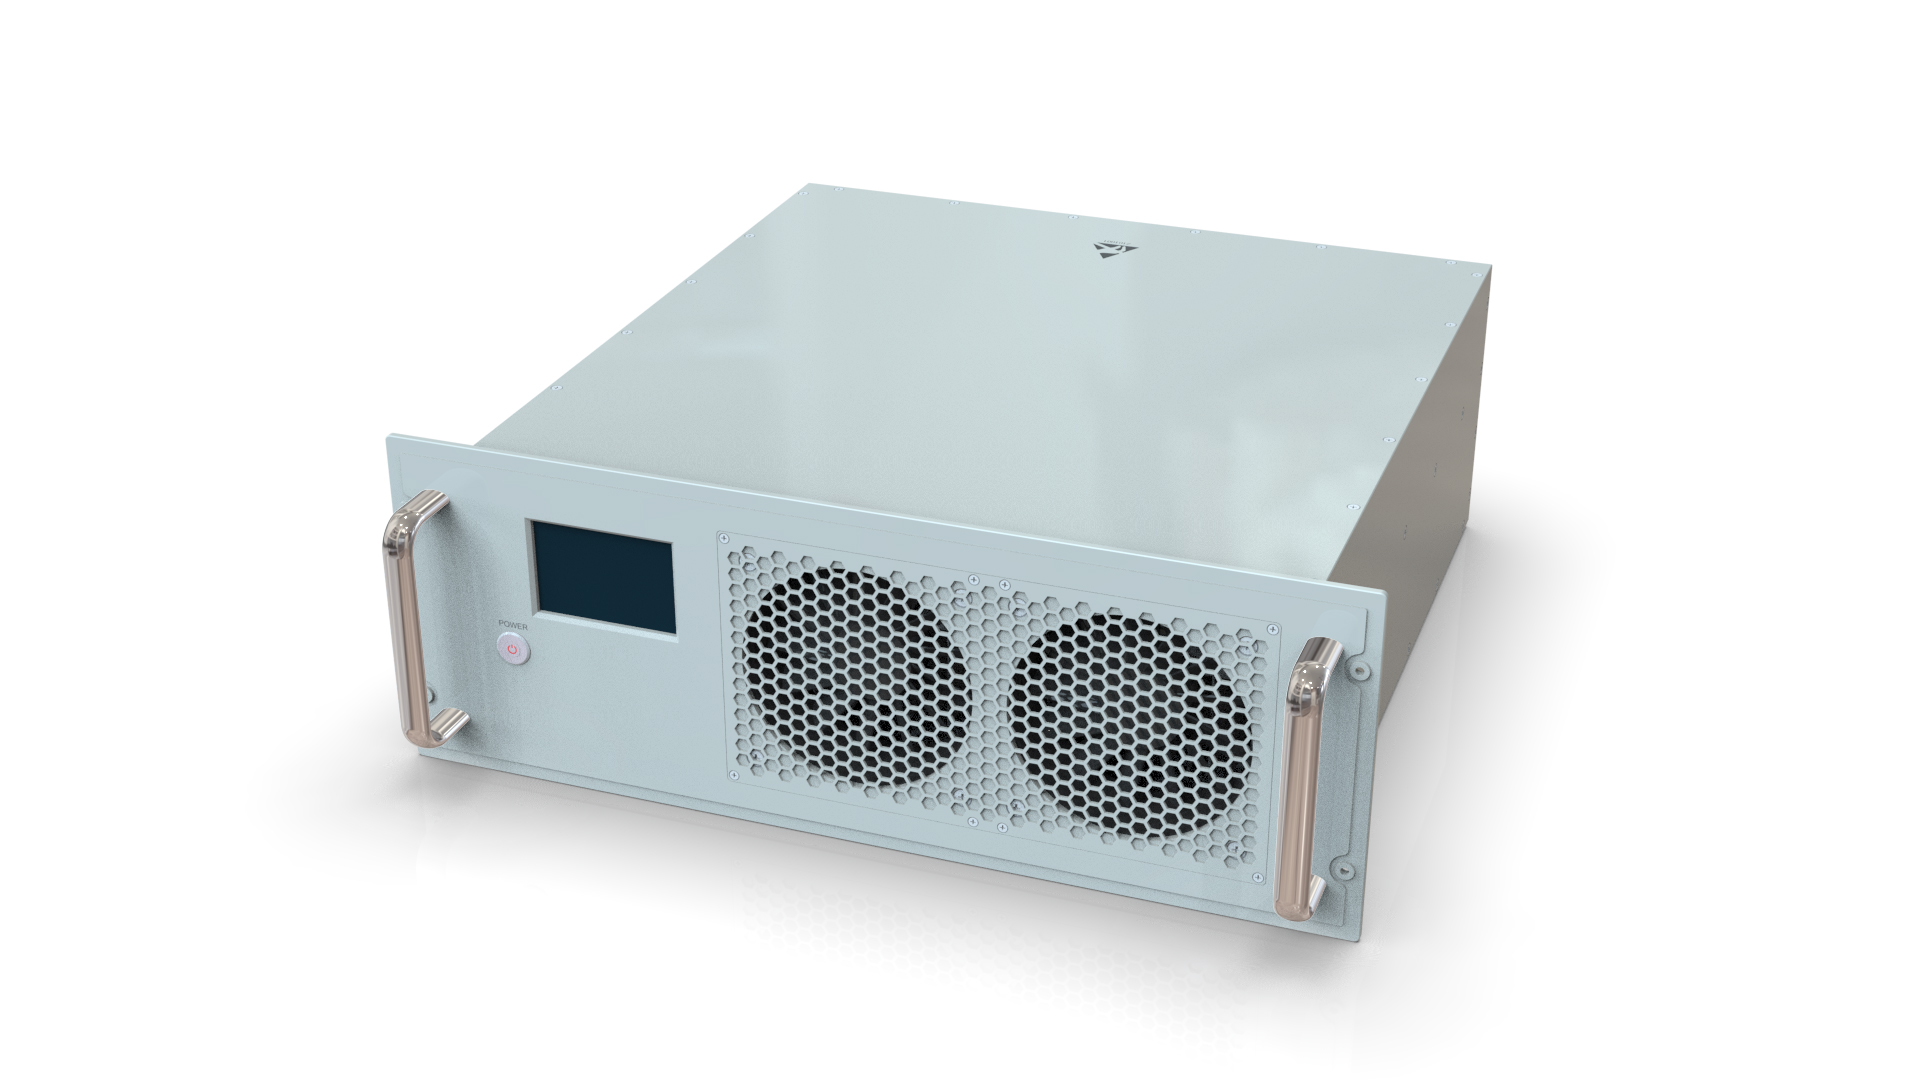 0.7GHz to 2.7GHz 150Watts RF wideband amplifier subsystem